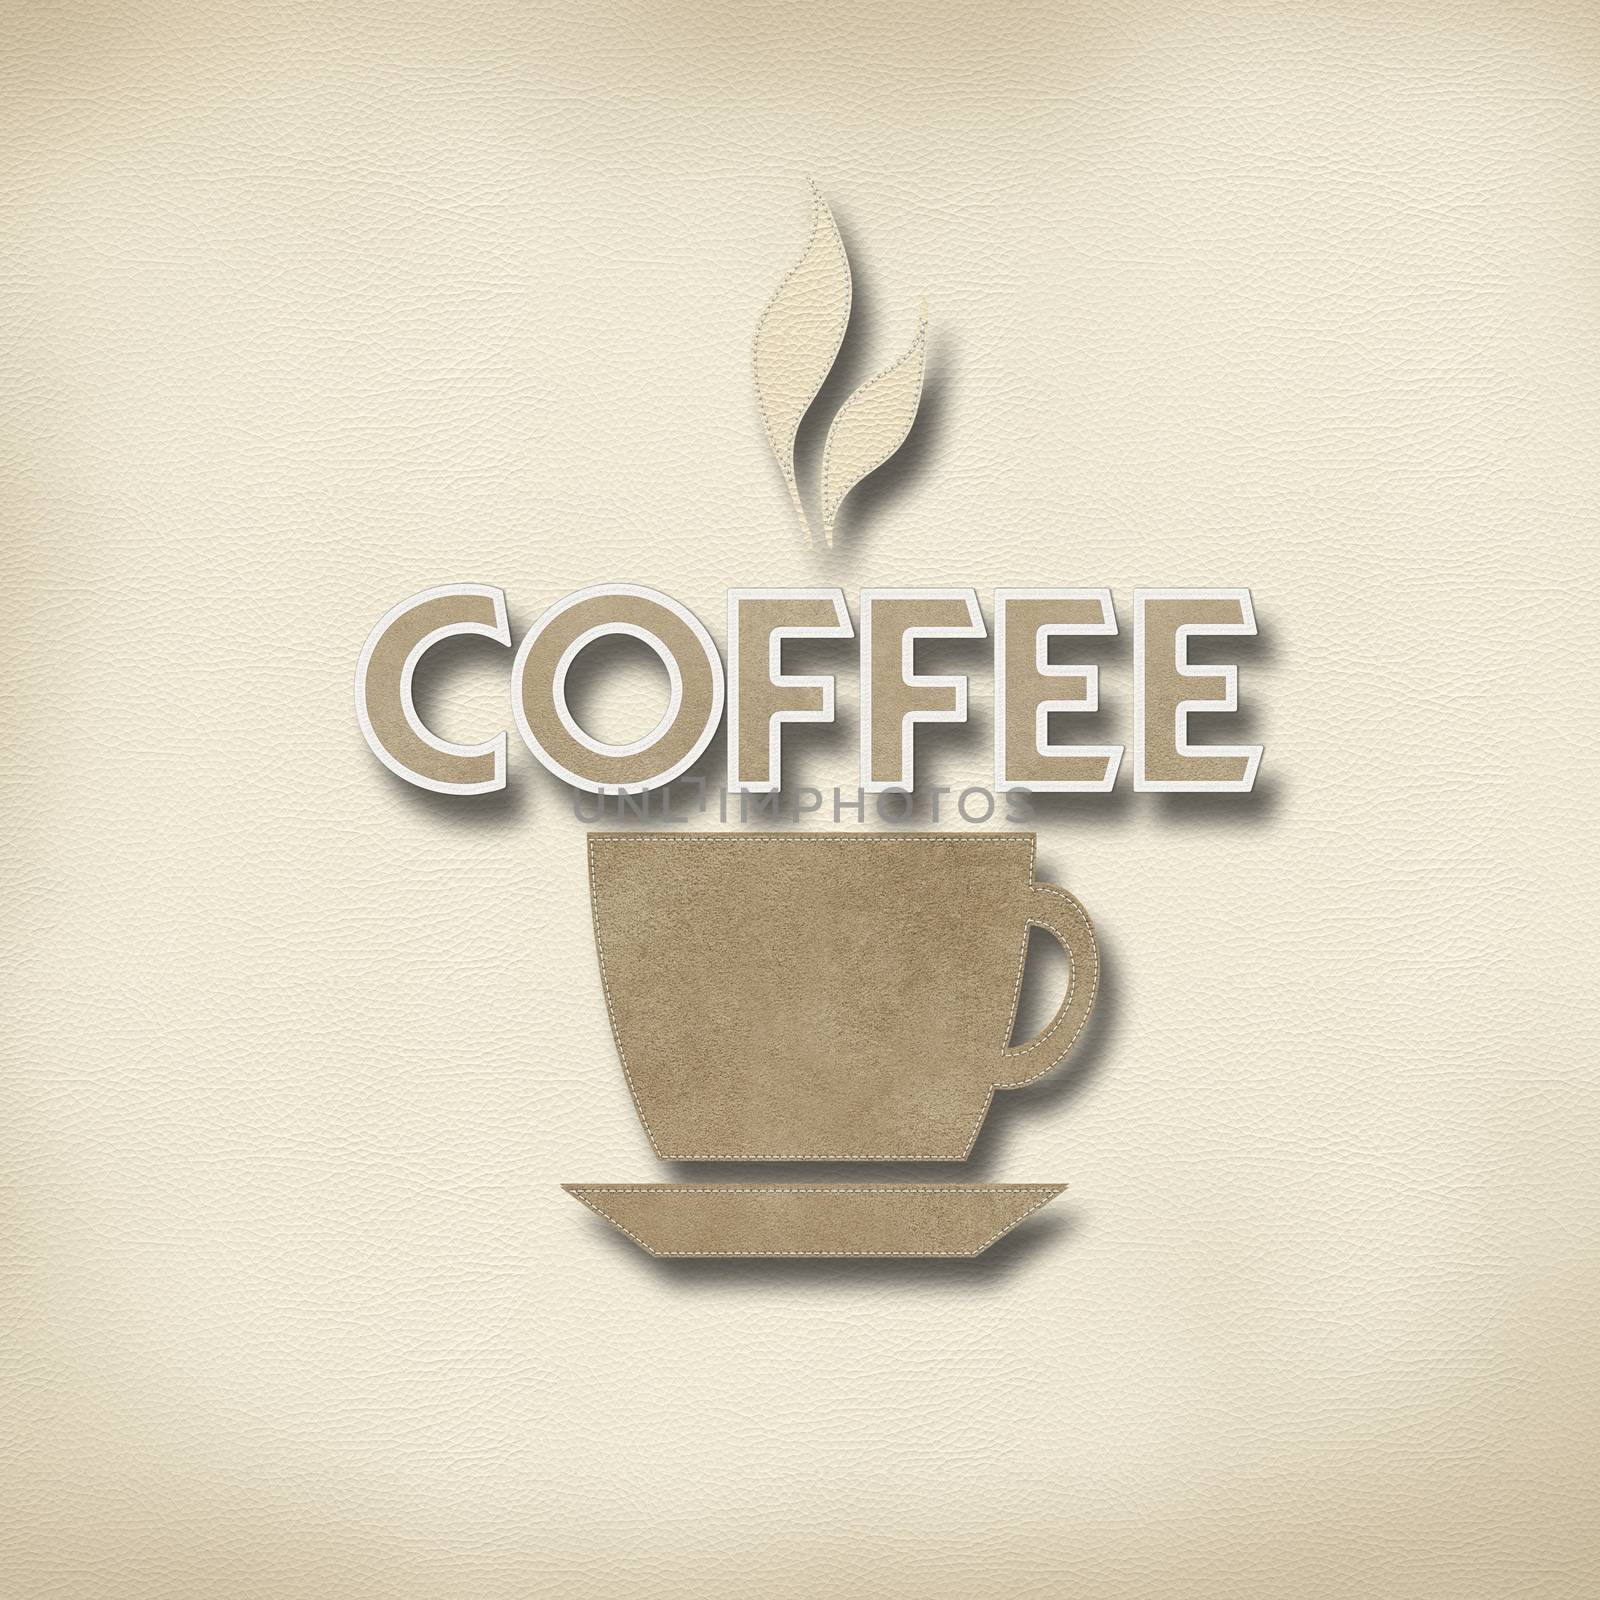 Coffee with stitch style on leather background by basketman23